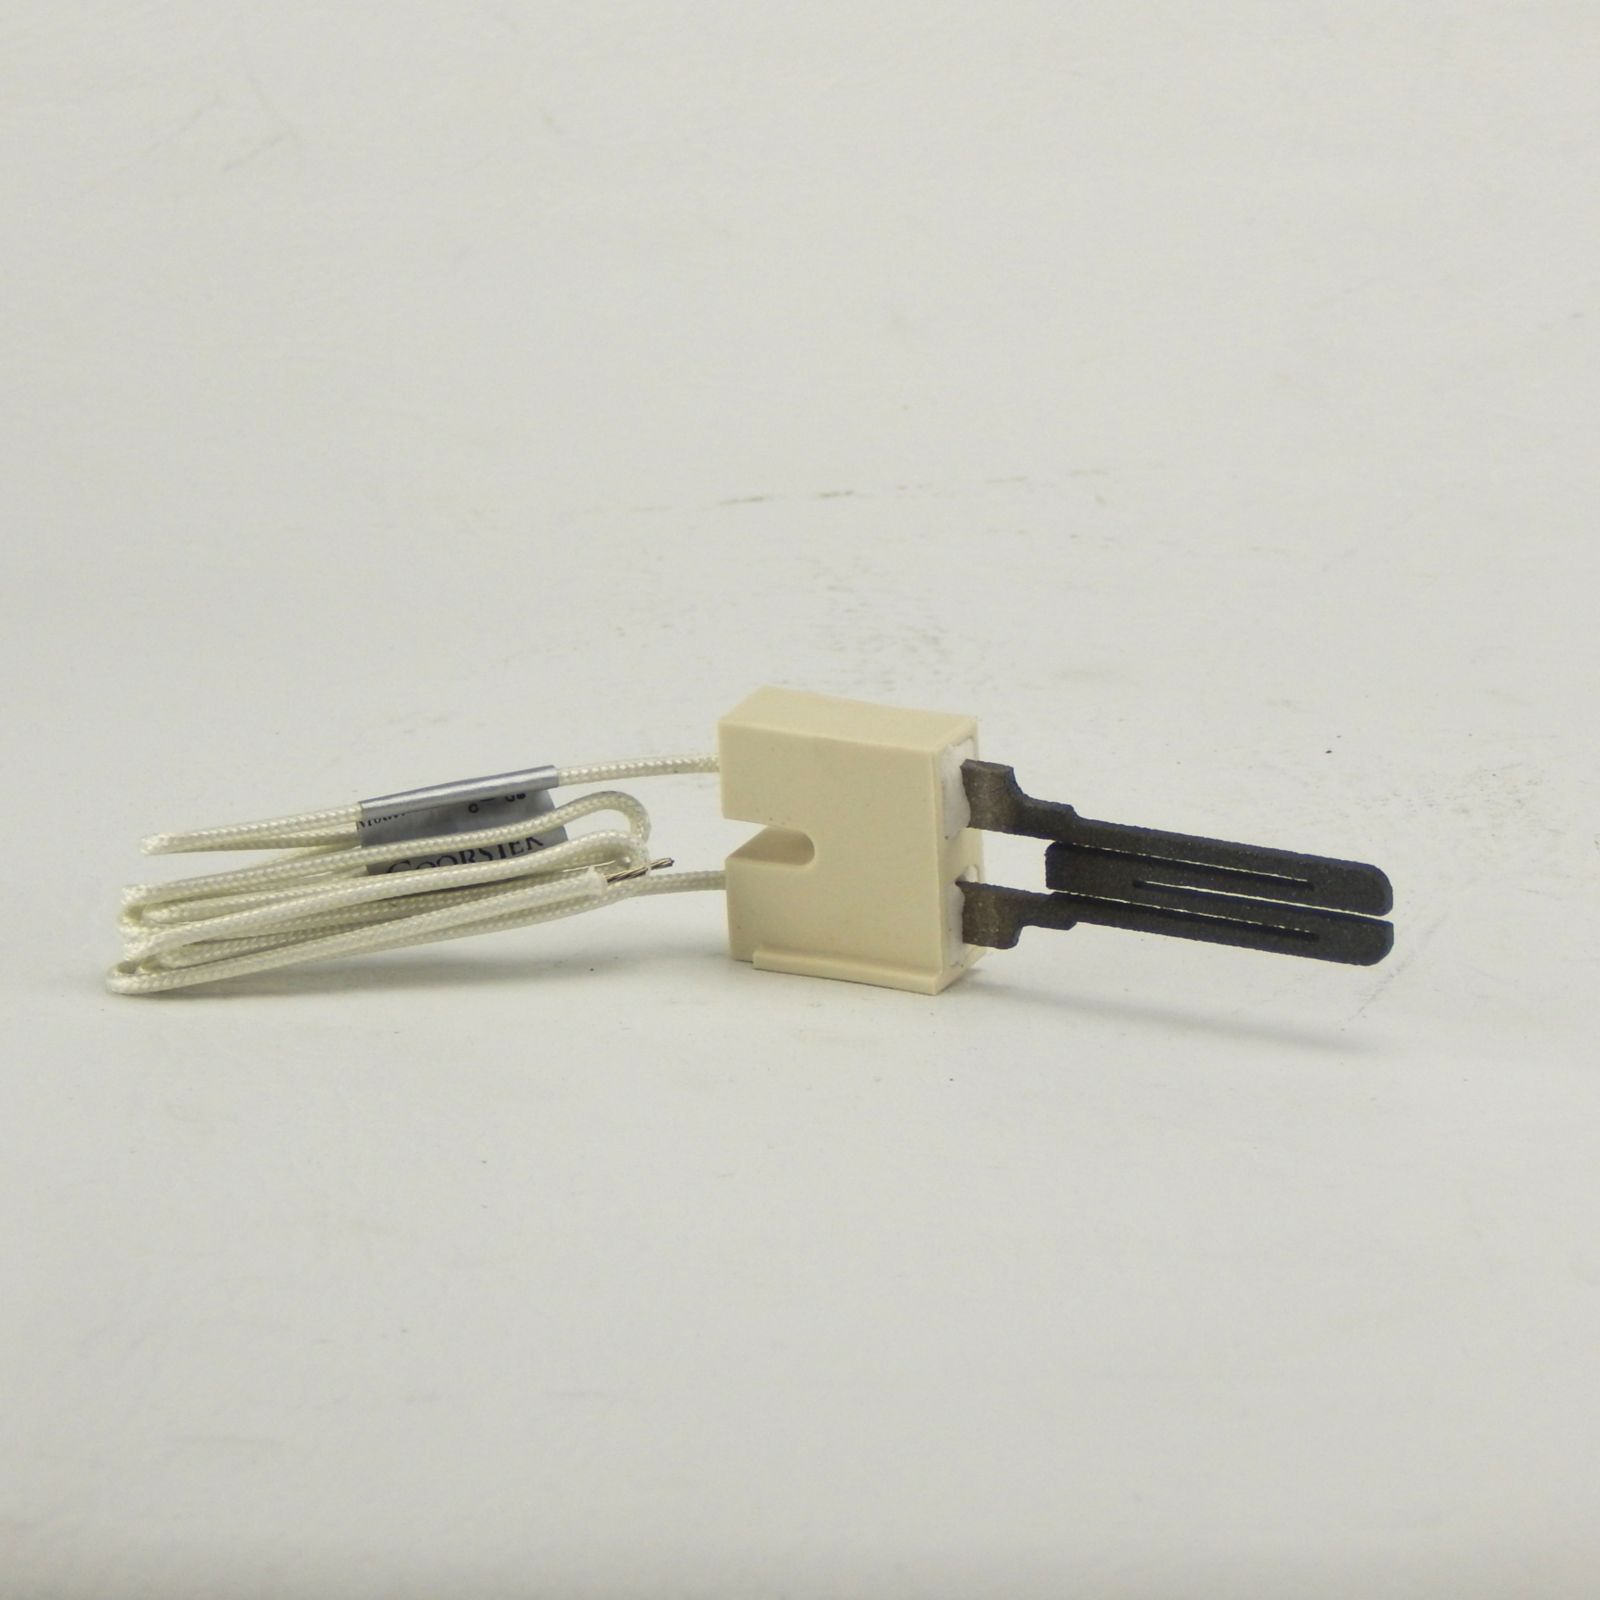 White-Rodgers 767A-371 - White-Rogers Silicon Carbide Hot Surface Ignitor With 19-1/8" Leads